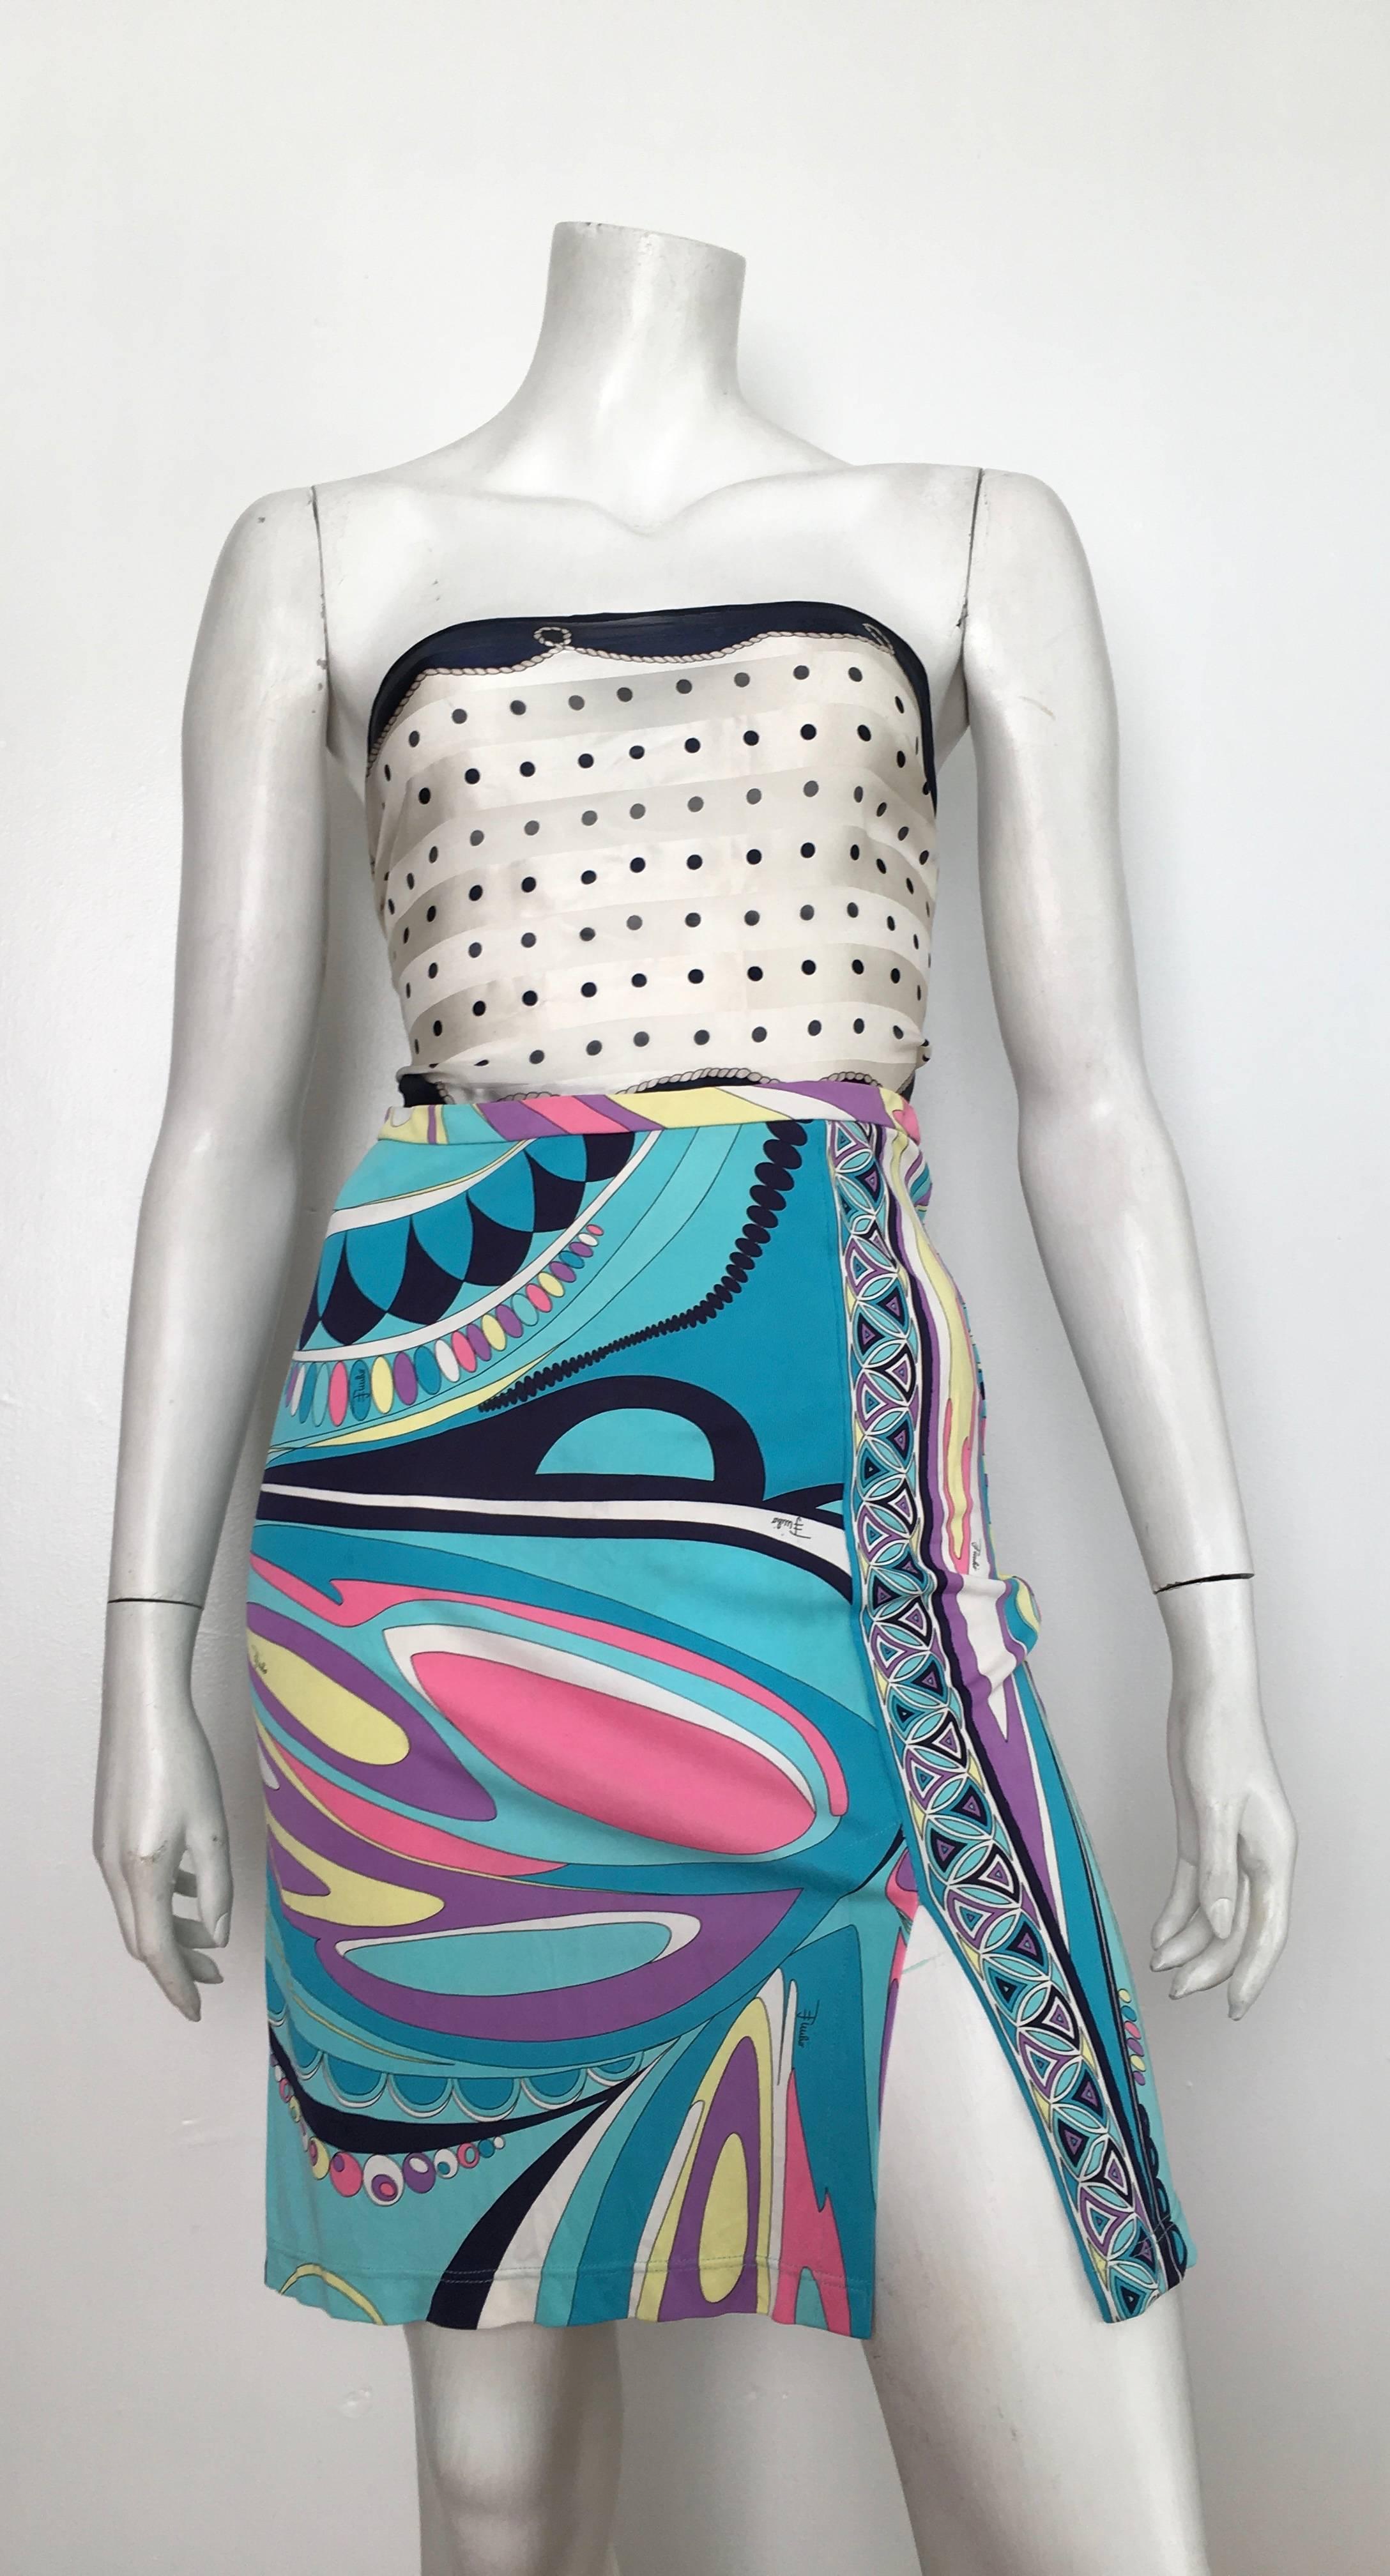 Emilio Pucci very sexy form fitting skirt with elastic waist band is a size 4. Whimsical and iconic Pucci print is timeless and classic.  Wear this skirt with your favorite vintage Hermes, Chanel or Bill Blass scarf as shown in photo tied in the